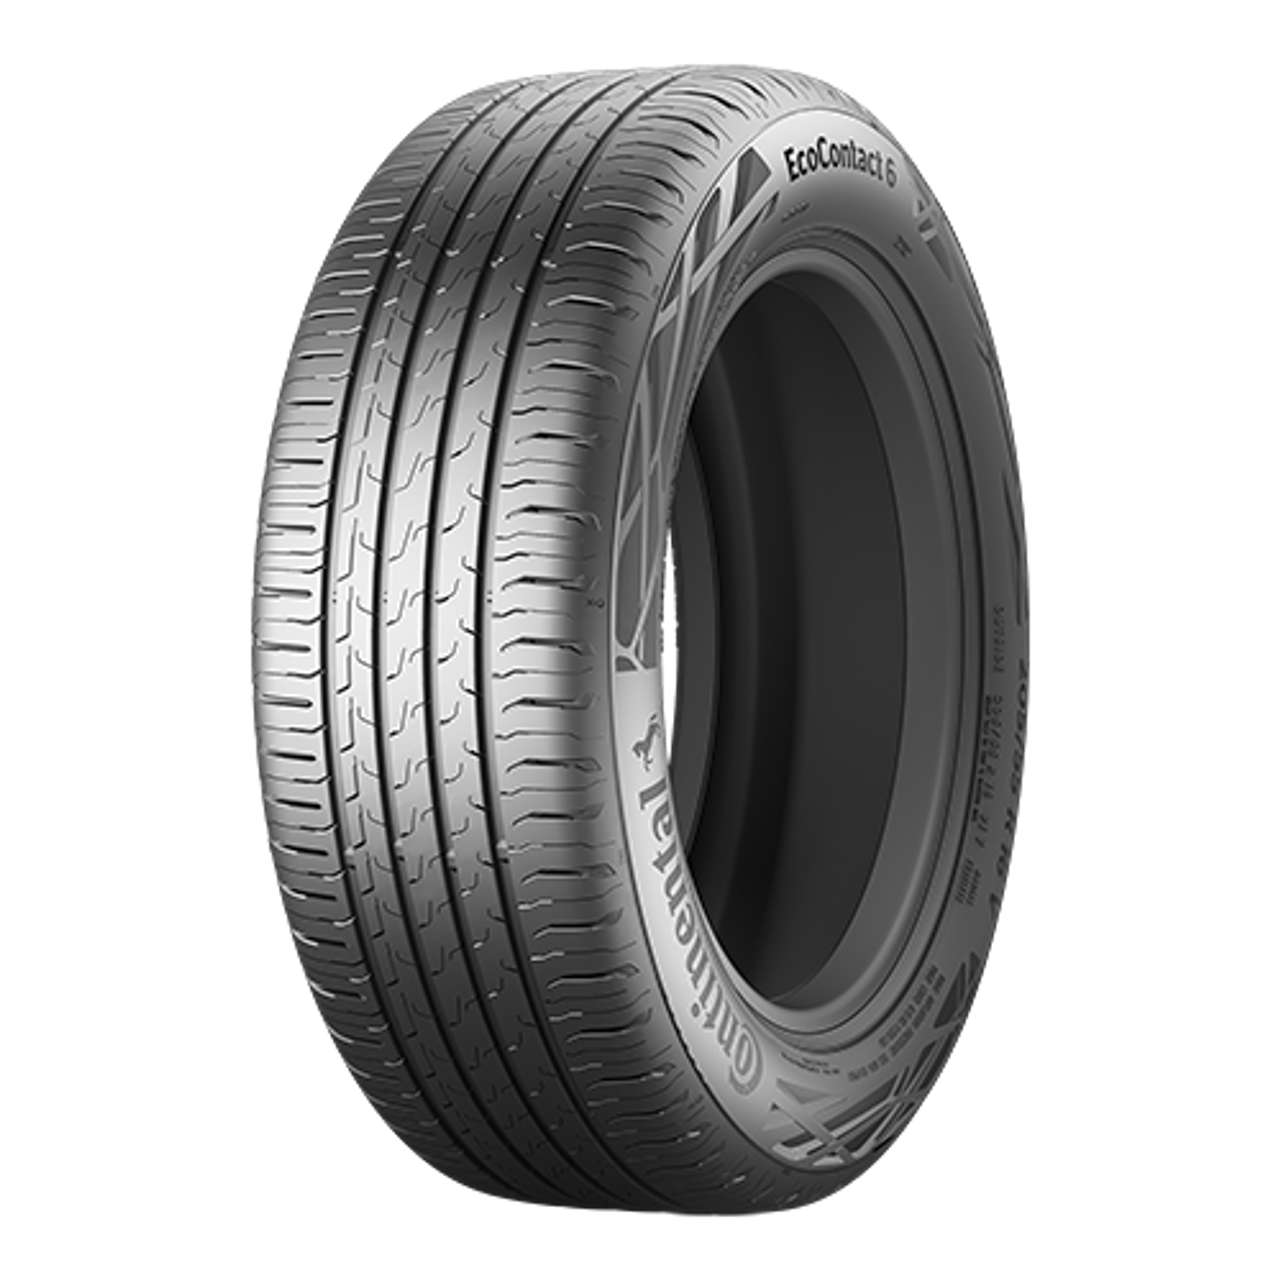 CONTINENTAL ECOCONTACT 6 (EVc) 205/55R16 91V BSW